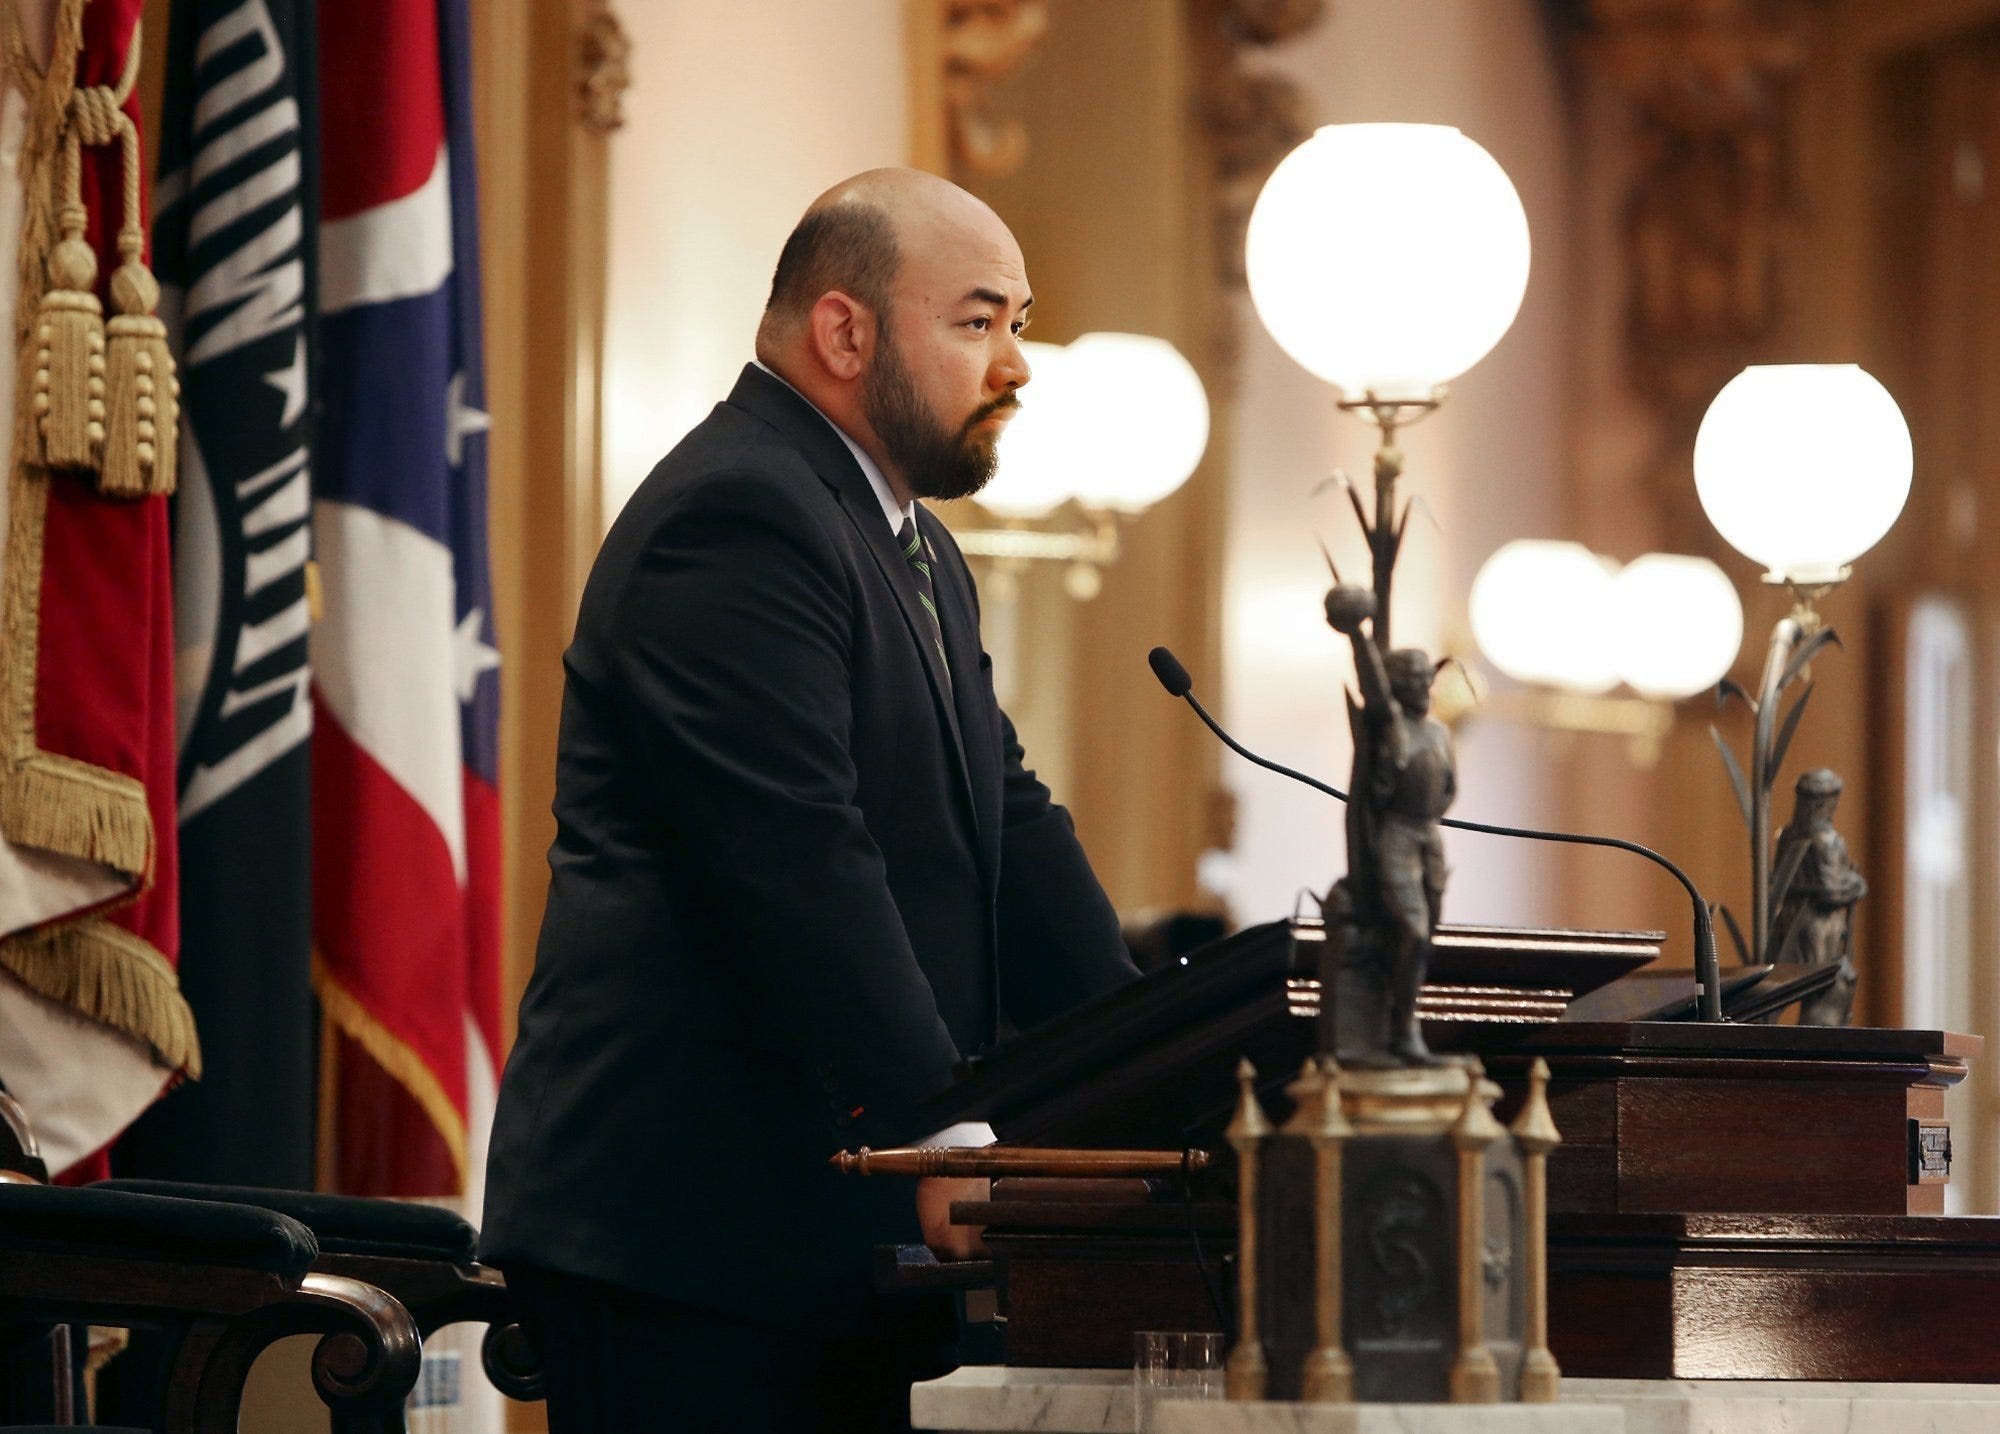 Feds quietly close investigation of former Ohio House Speaker Cliff Rosenberger